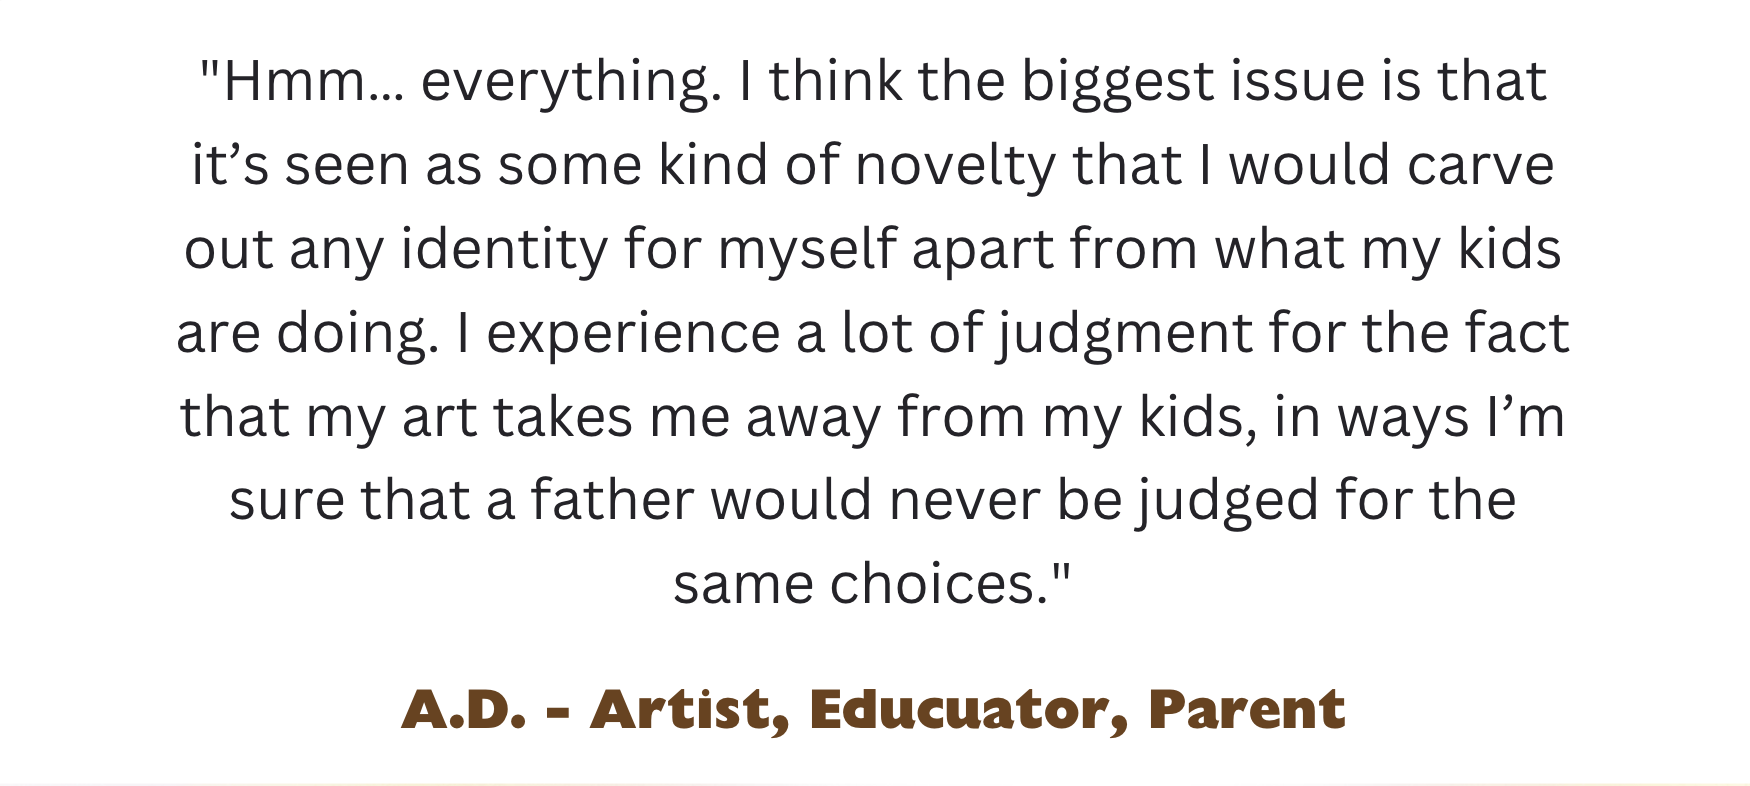 Hmm... everything. I think the biggest issue is that it’s seen as some kind of novelty that I would carve out any identity for myself apart from what my kids are doing. I experience a lot of judgment for the fact that my art takes me away from my kids, in ways I’m sure that a father would never be judged for the same choices. A.D. - Artist, Educator, Parent 